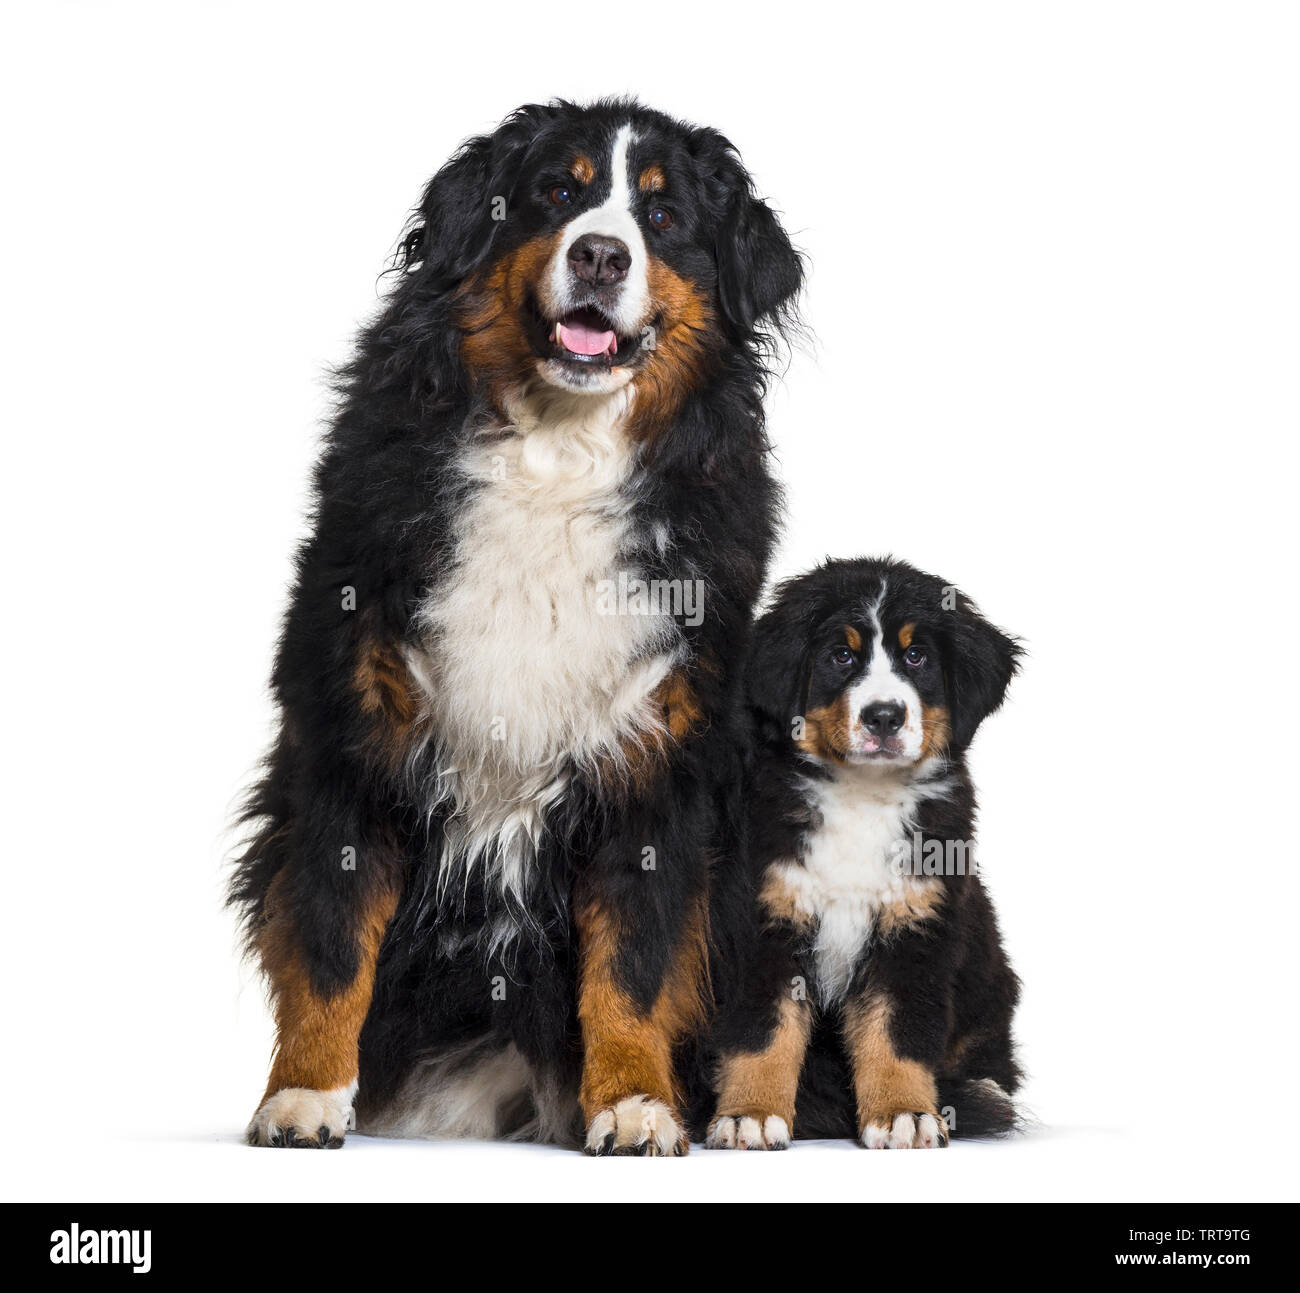 Bernese Mountain Dog, 8 years old and 3 months old, sitting in front of white background Stock Photo